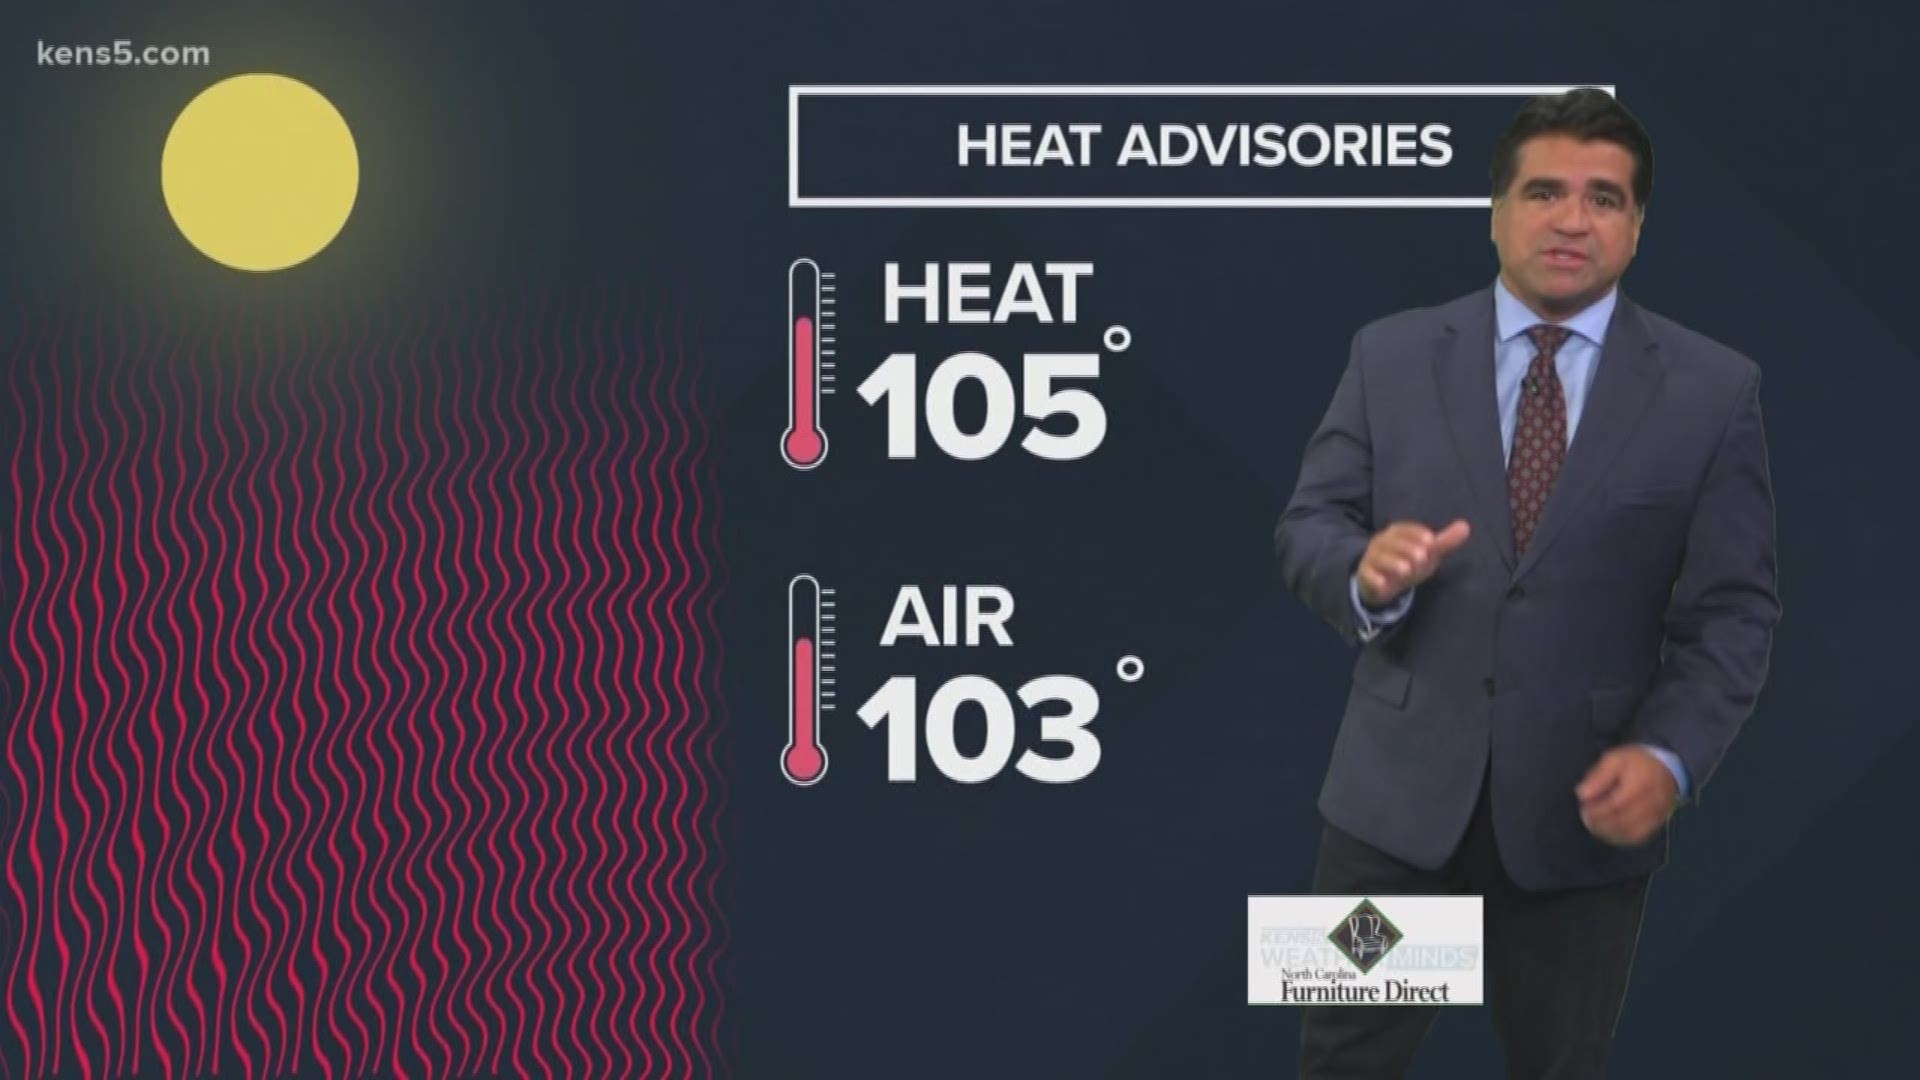 San Antonio hits day 9 in a row of triple-digit temperatures. And when it's that hot outside, a few degrees can make a difference. KENS 5 Meteorologist Paul Mireles shows us the criteria needed for a heat advisory or warning.